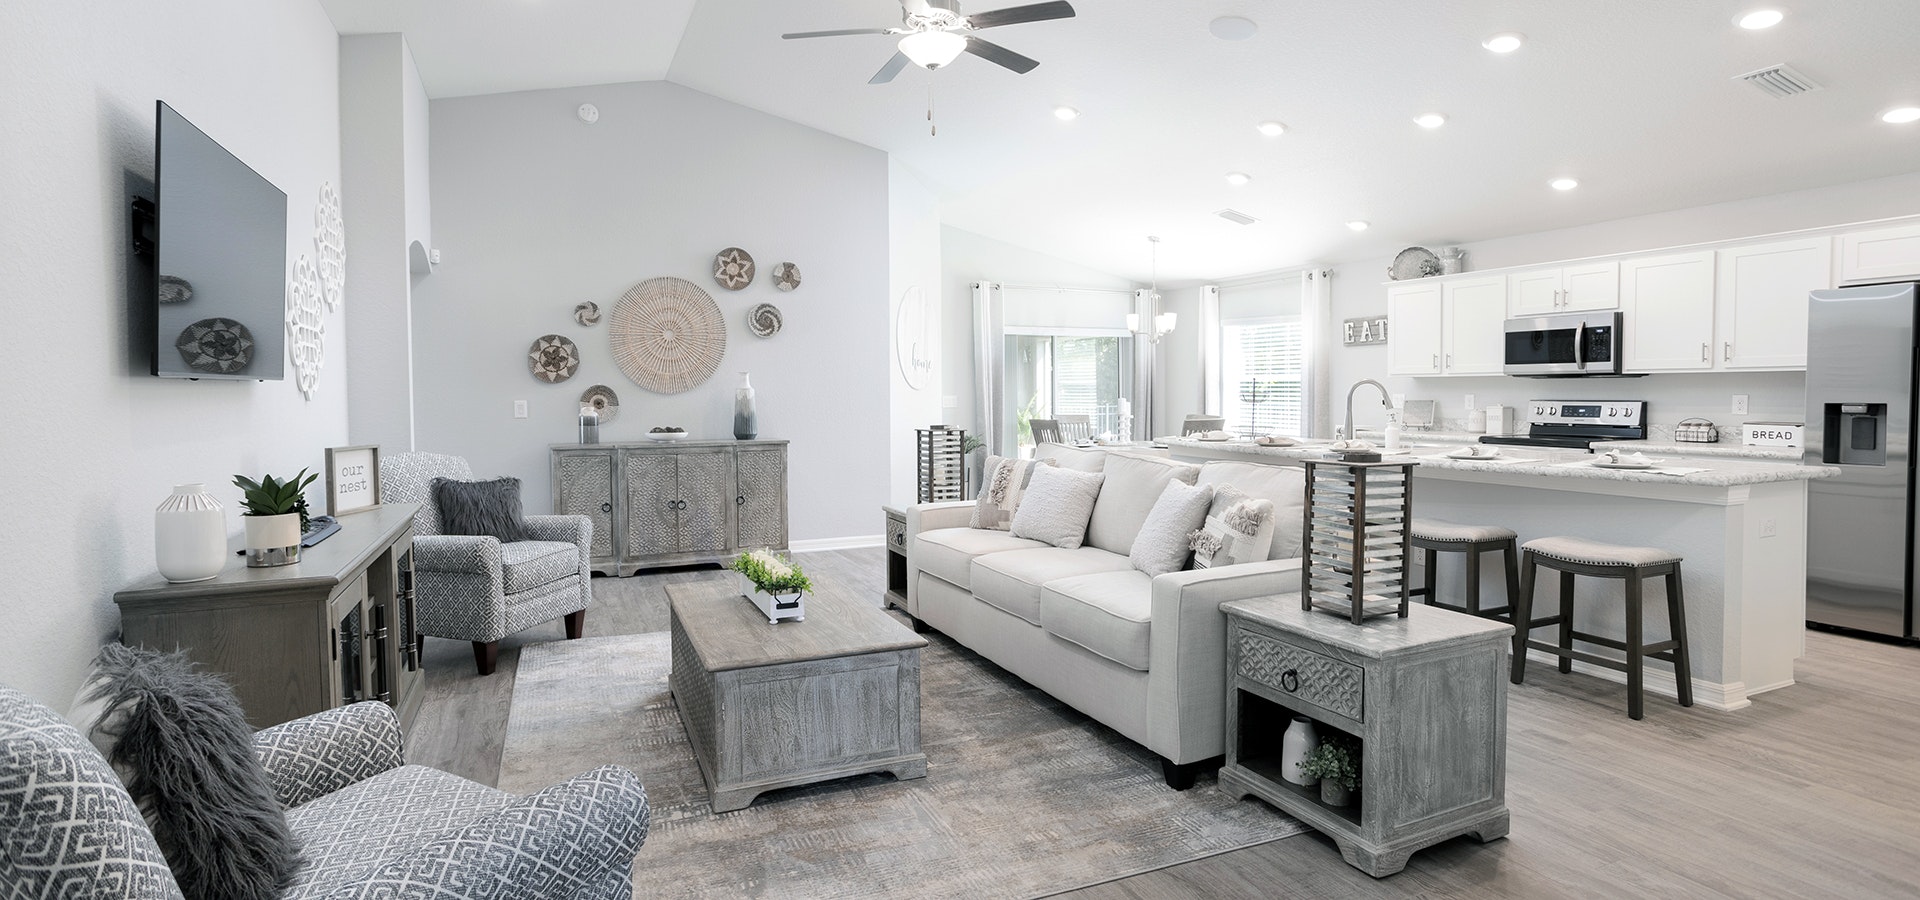 Living area in Highland Homes' model home at Jackson Crossing in Palmetto, FL